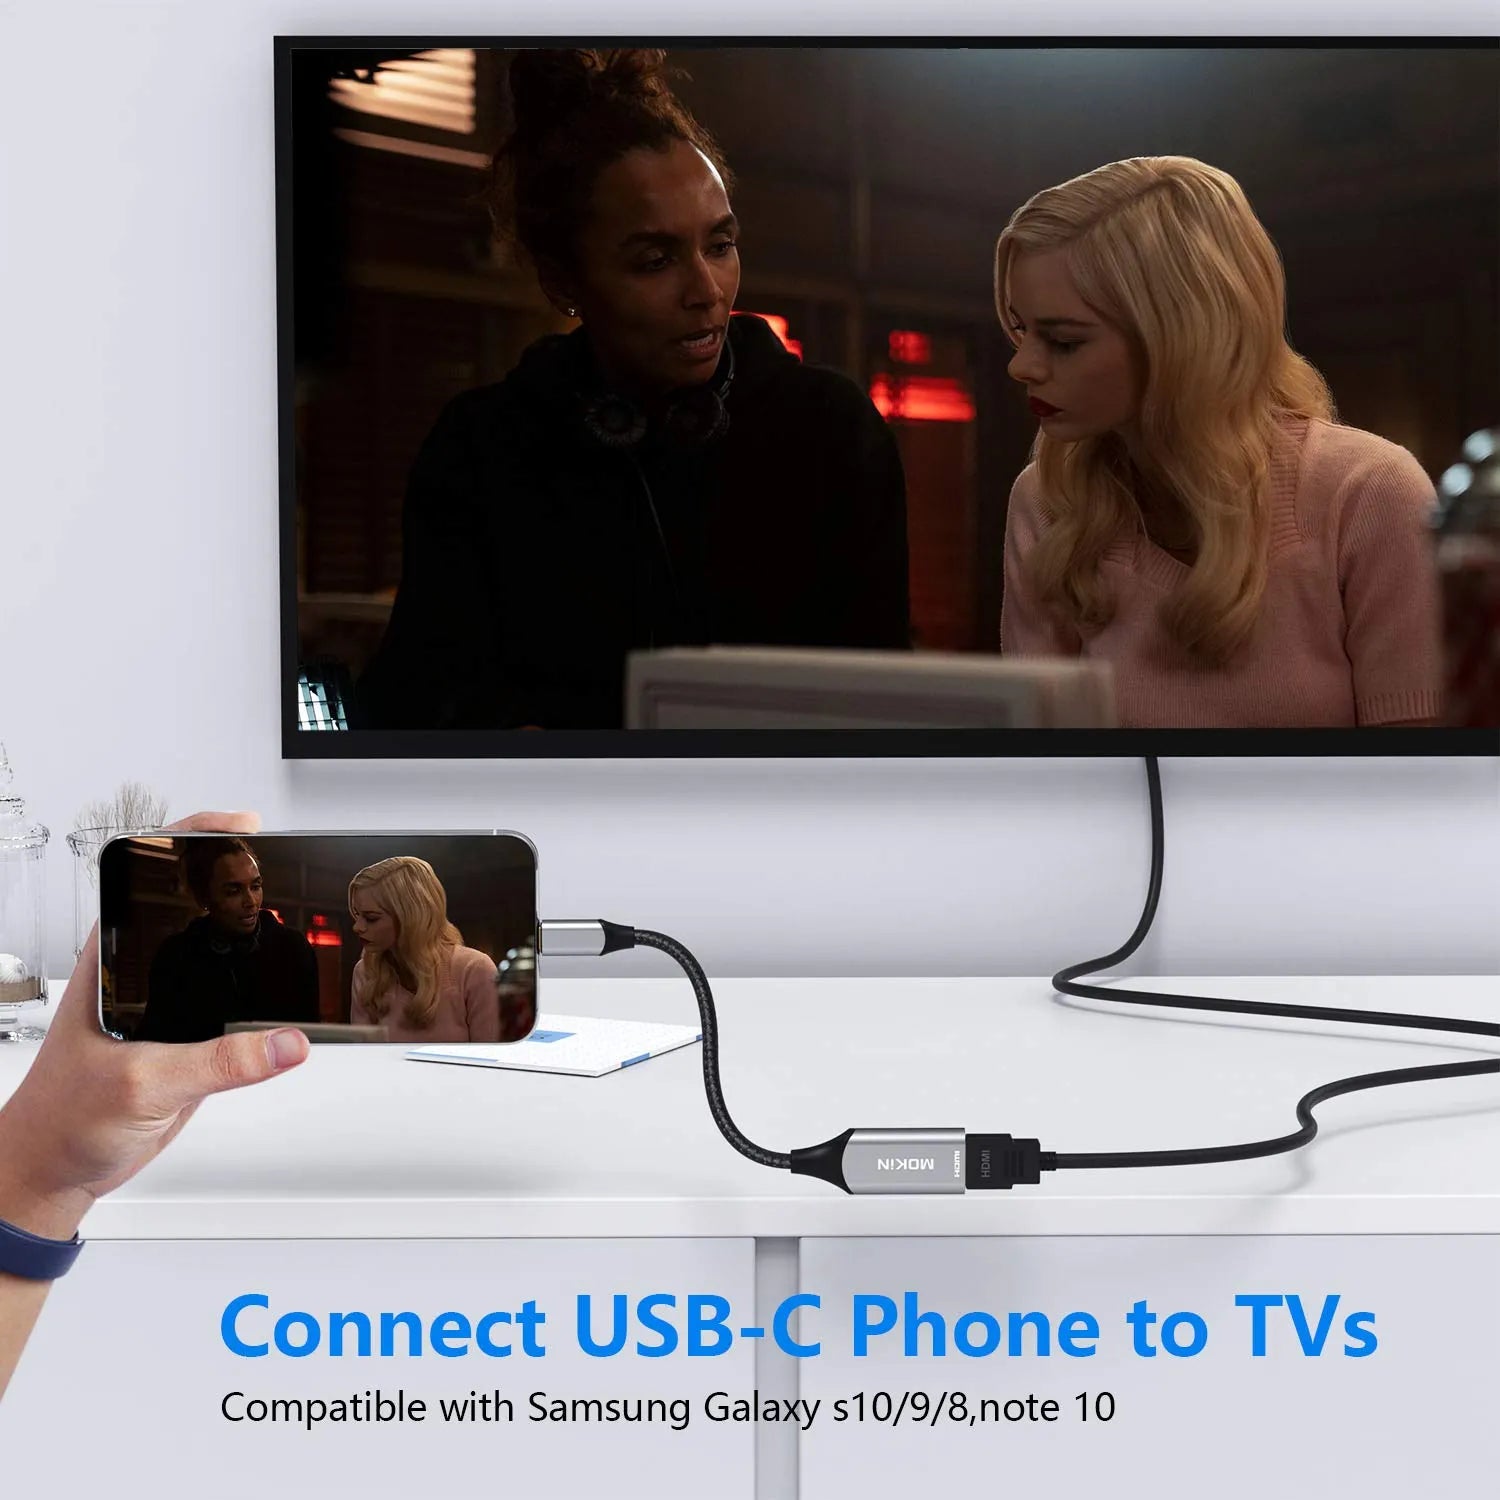 Connect USB-C Phone to TVs